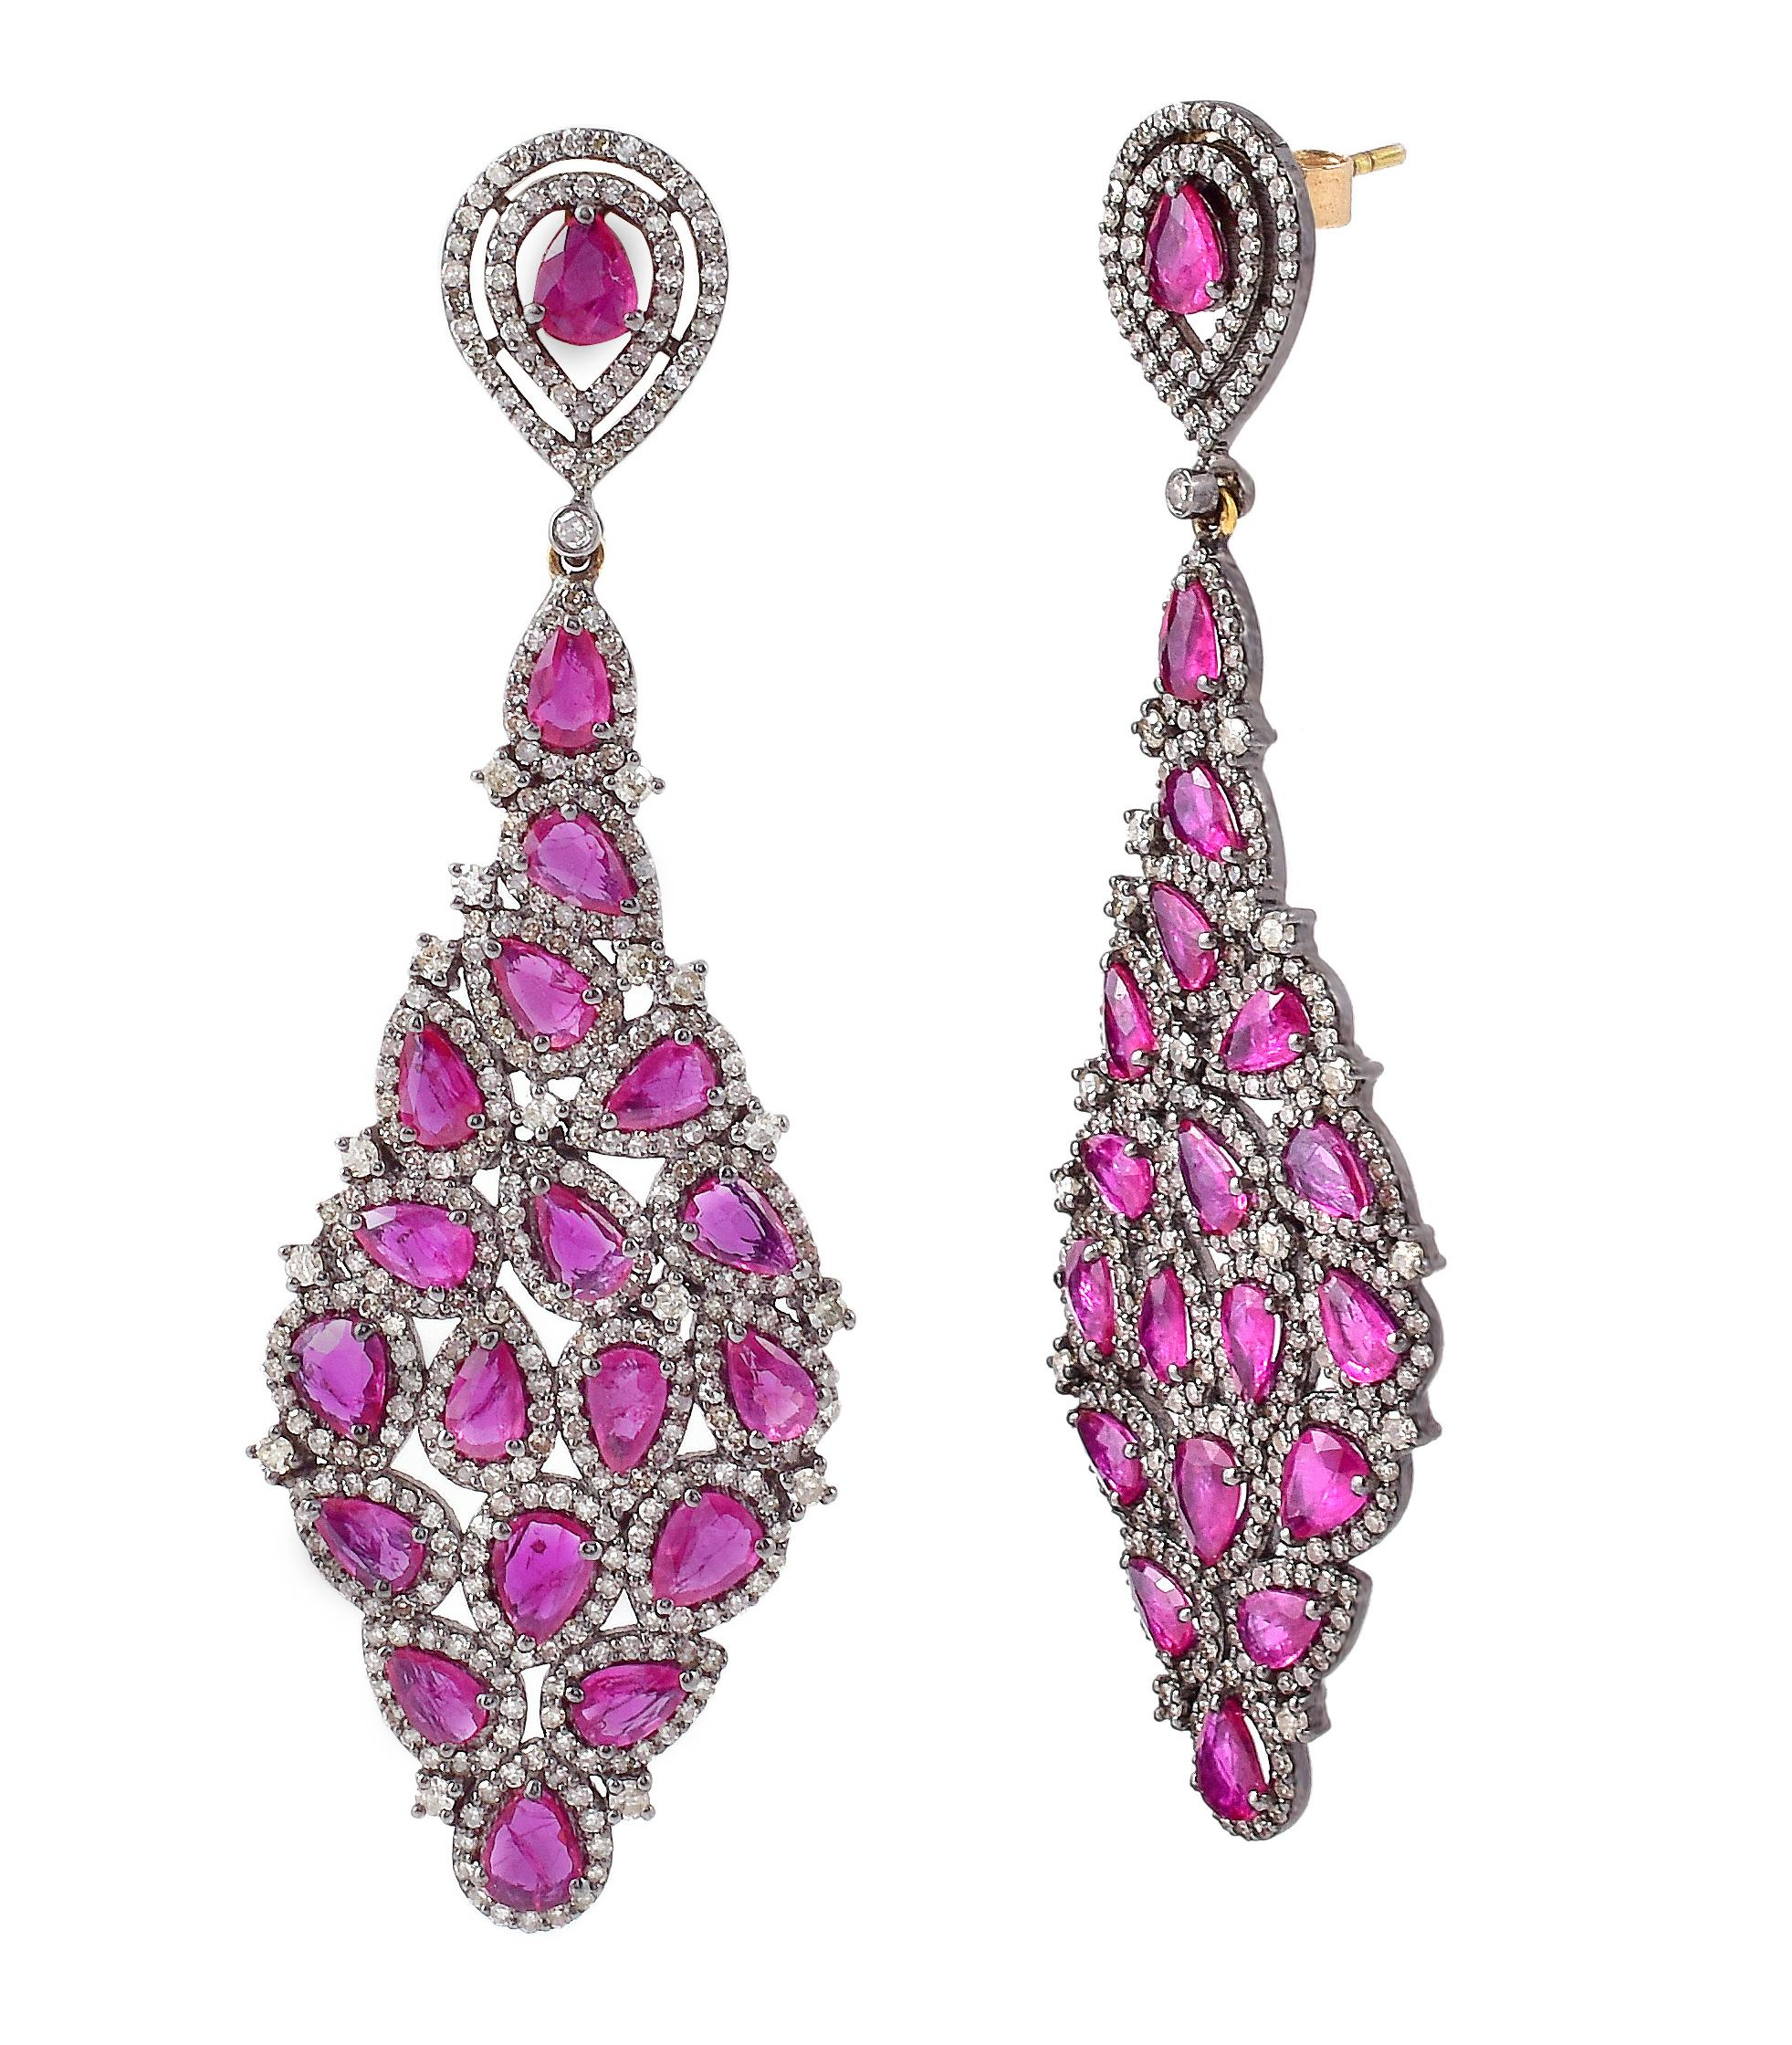 11.47 Carat Diamond and Ruby Drop Earrings in Contemporary Victorian Style

This Victorian style scarlet red ruby and diamond long earring is sensational. The bottom teardrop is formed with the exquisite combination of solitaire pear rubies